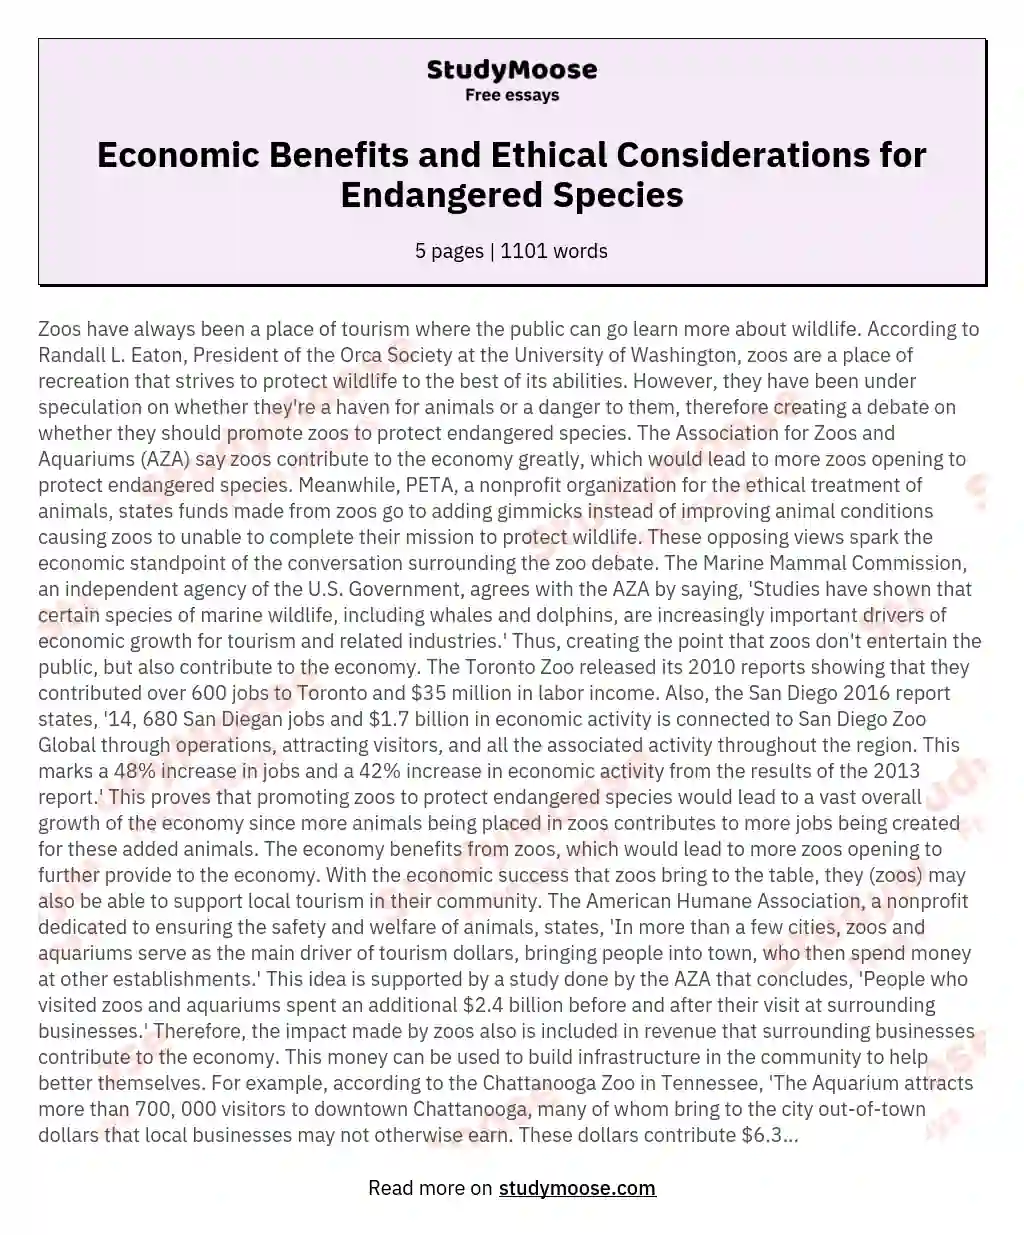 Economic Benefits and Ethical Considerations for Endangered Species essay